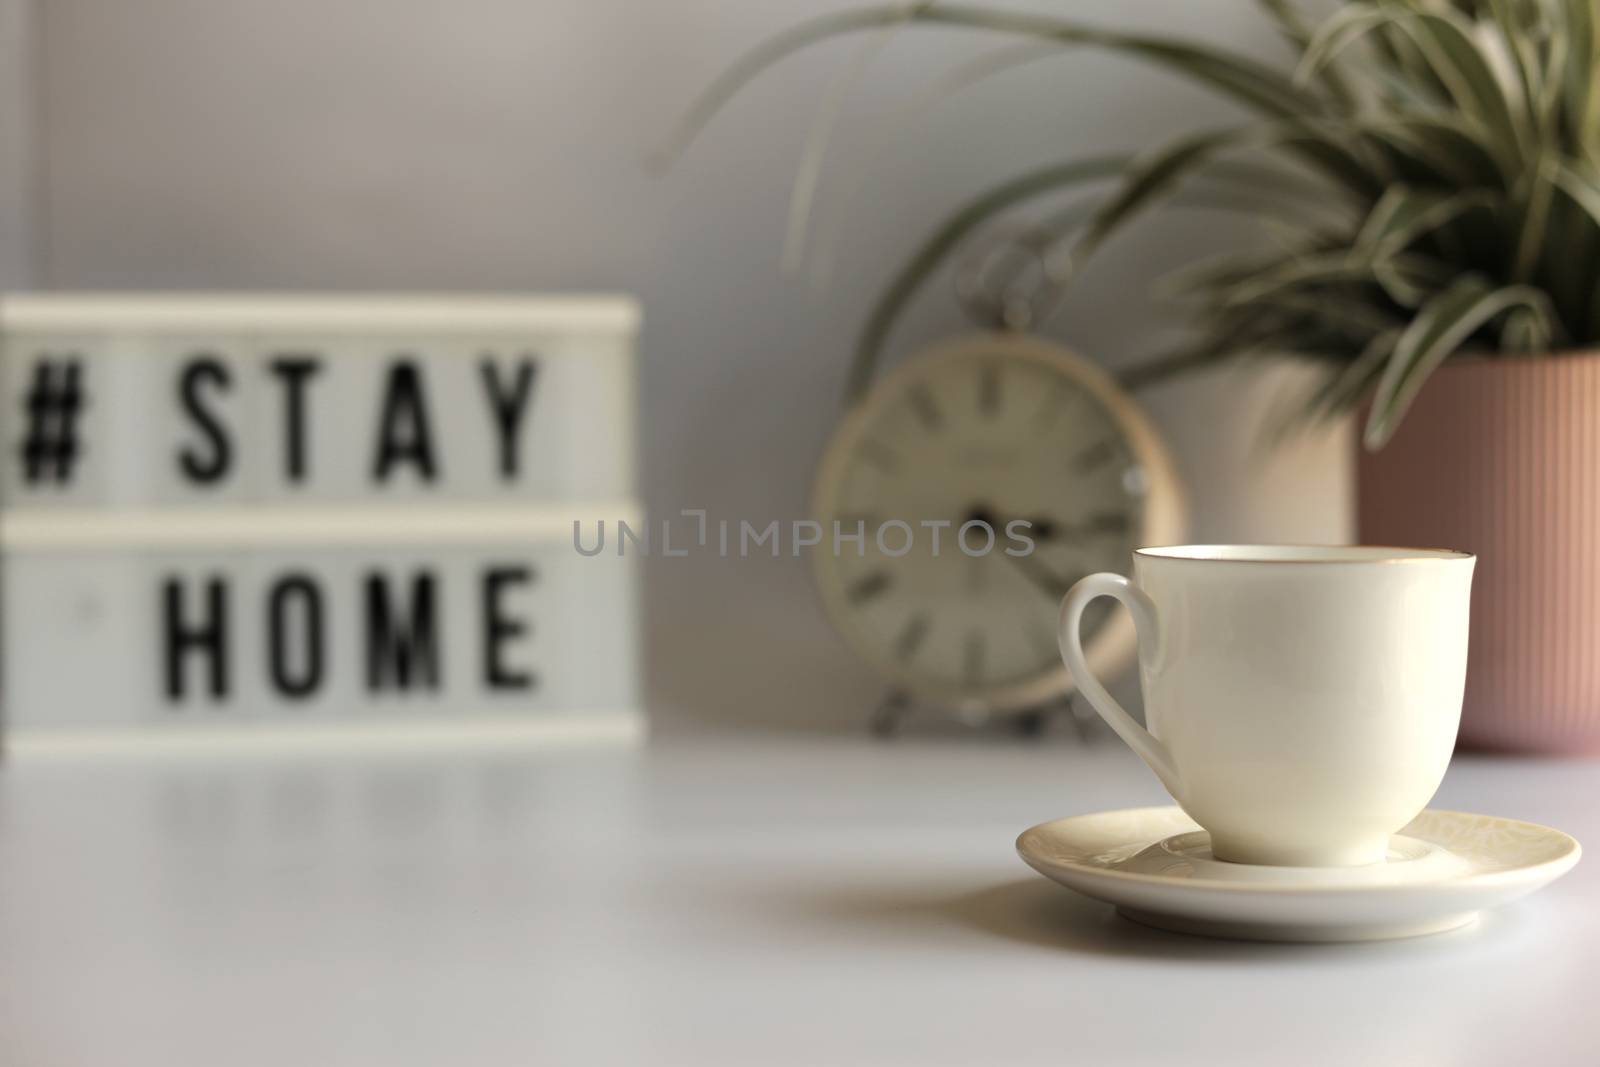 Home office desc concept during self quarantine as preventive measure against virus. Stay safe concept. Cup of coffee, clock, stationary, home plant on white background